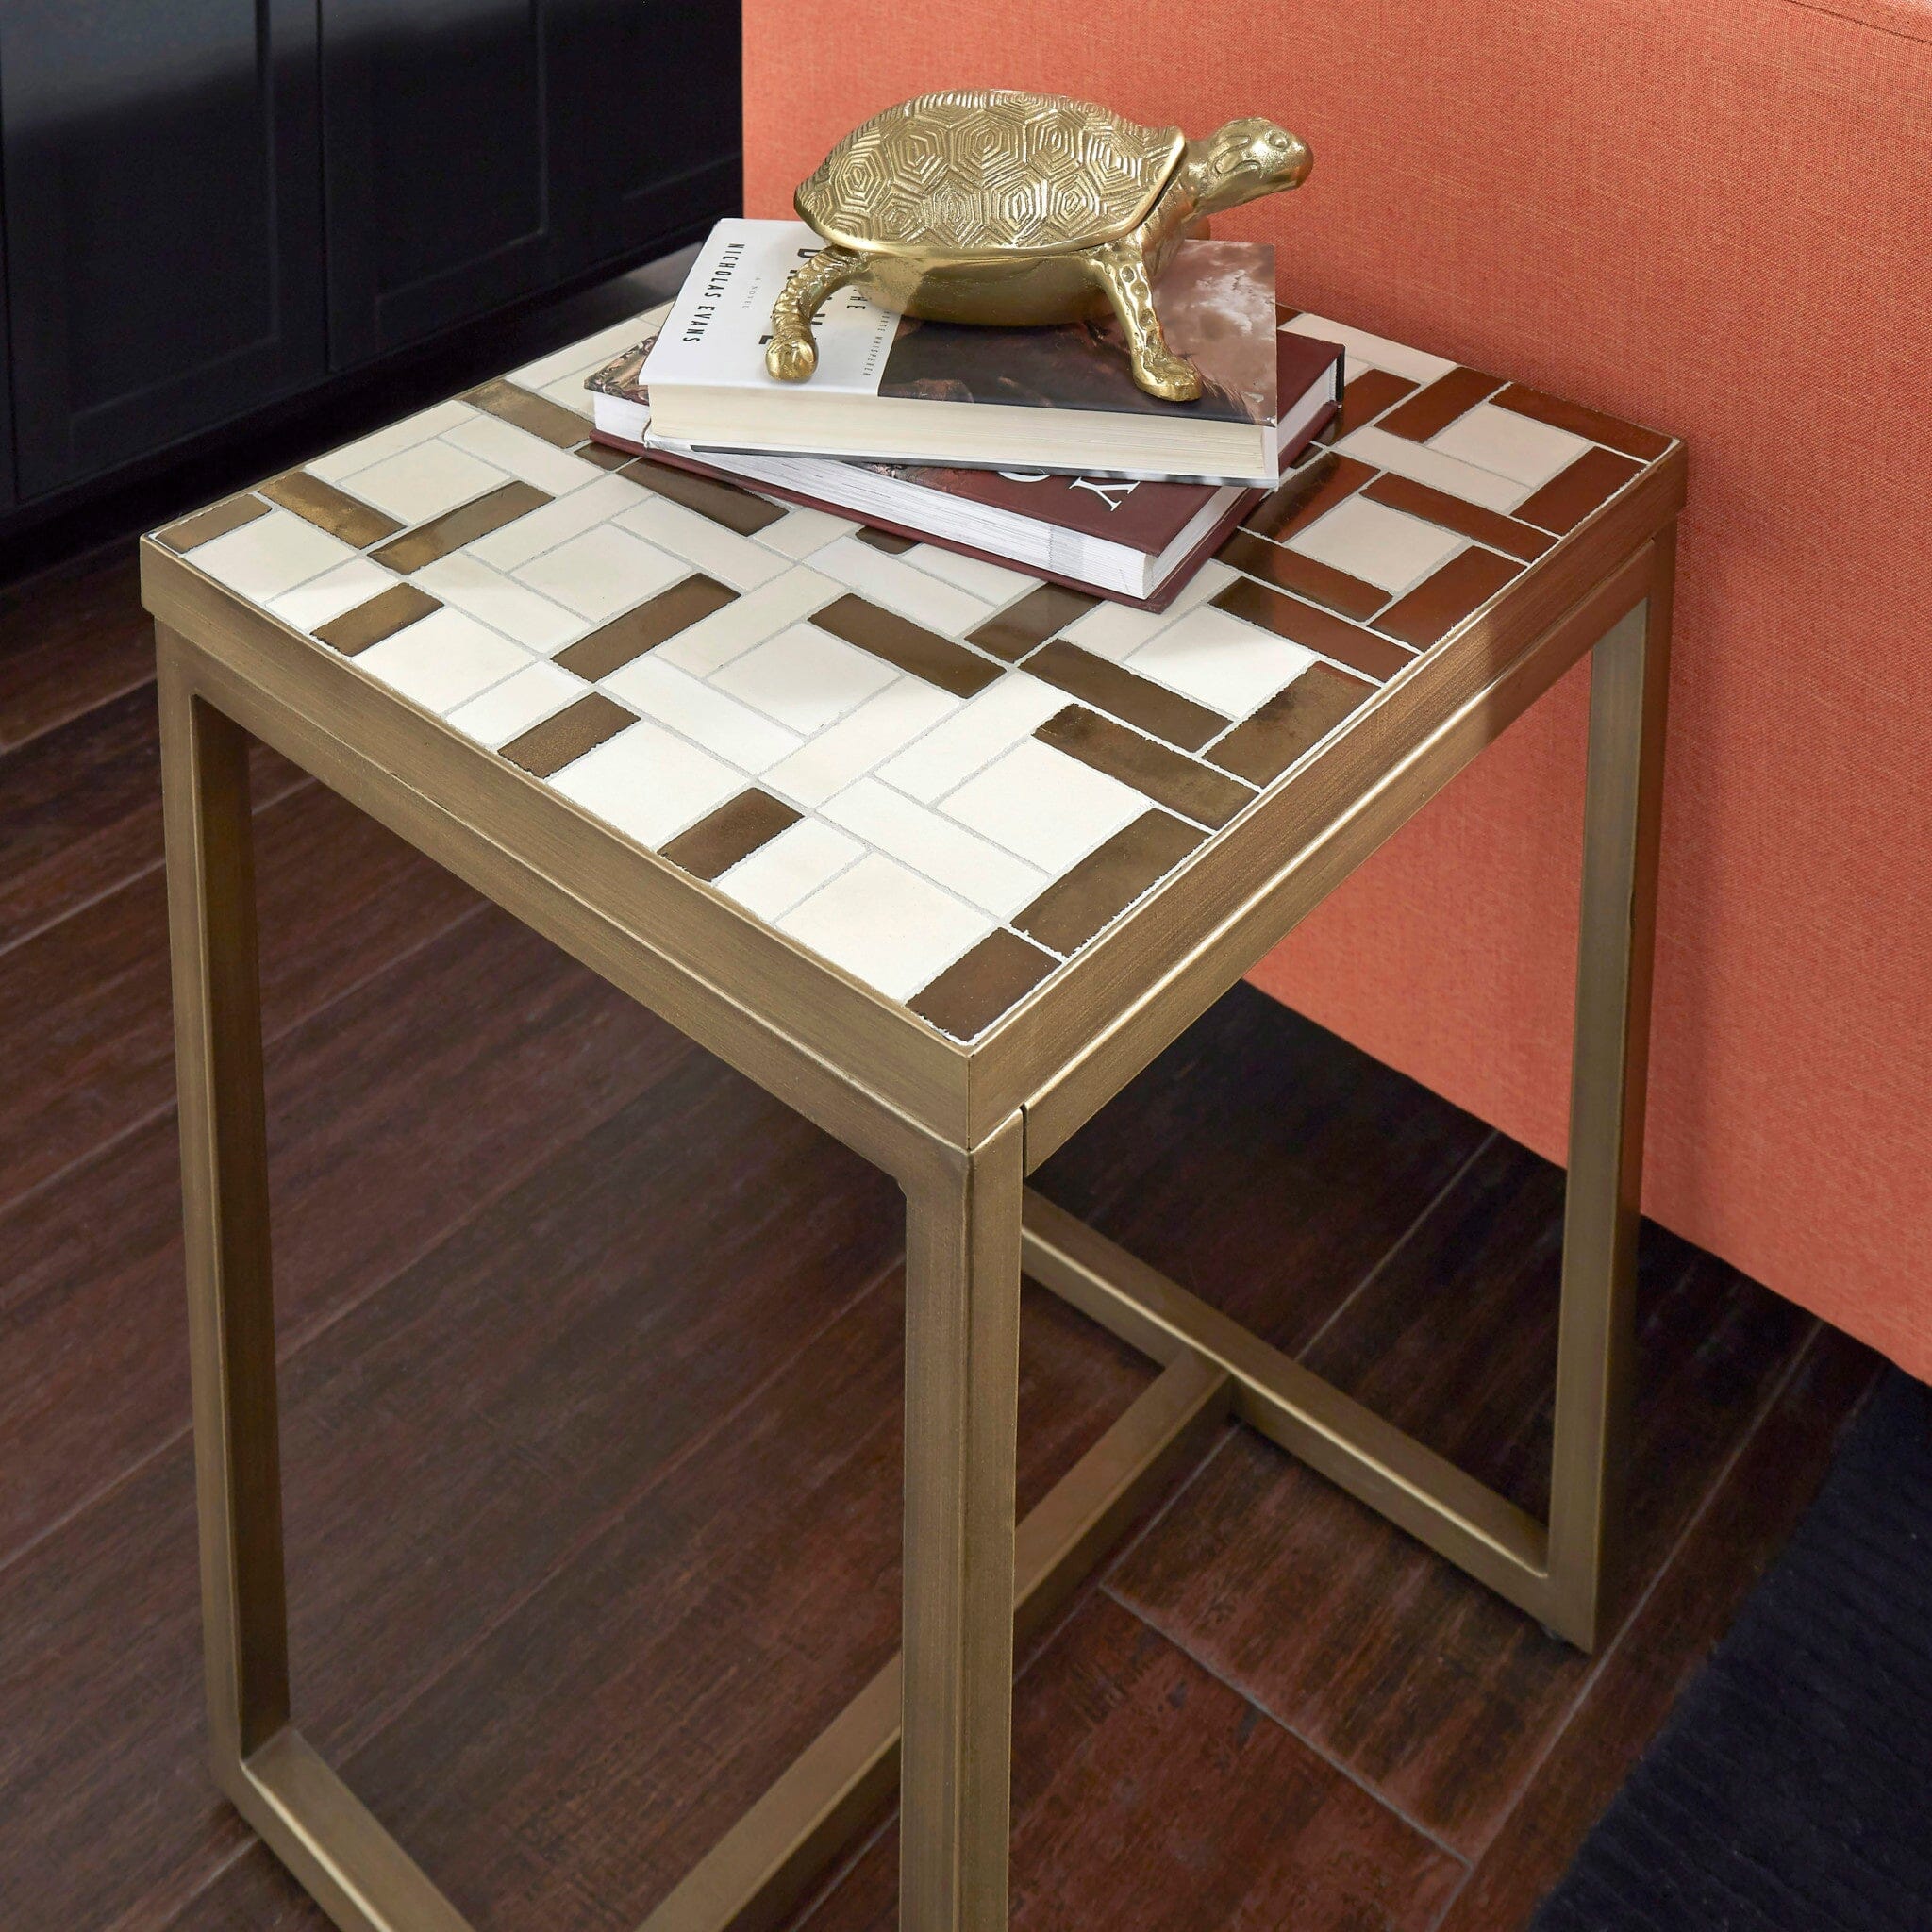 Modern & Contemporary End Table By Geometric Ii End Tables Geometric Ii